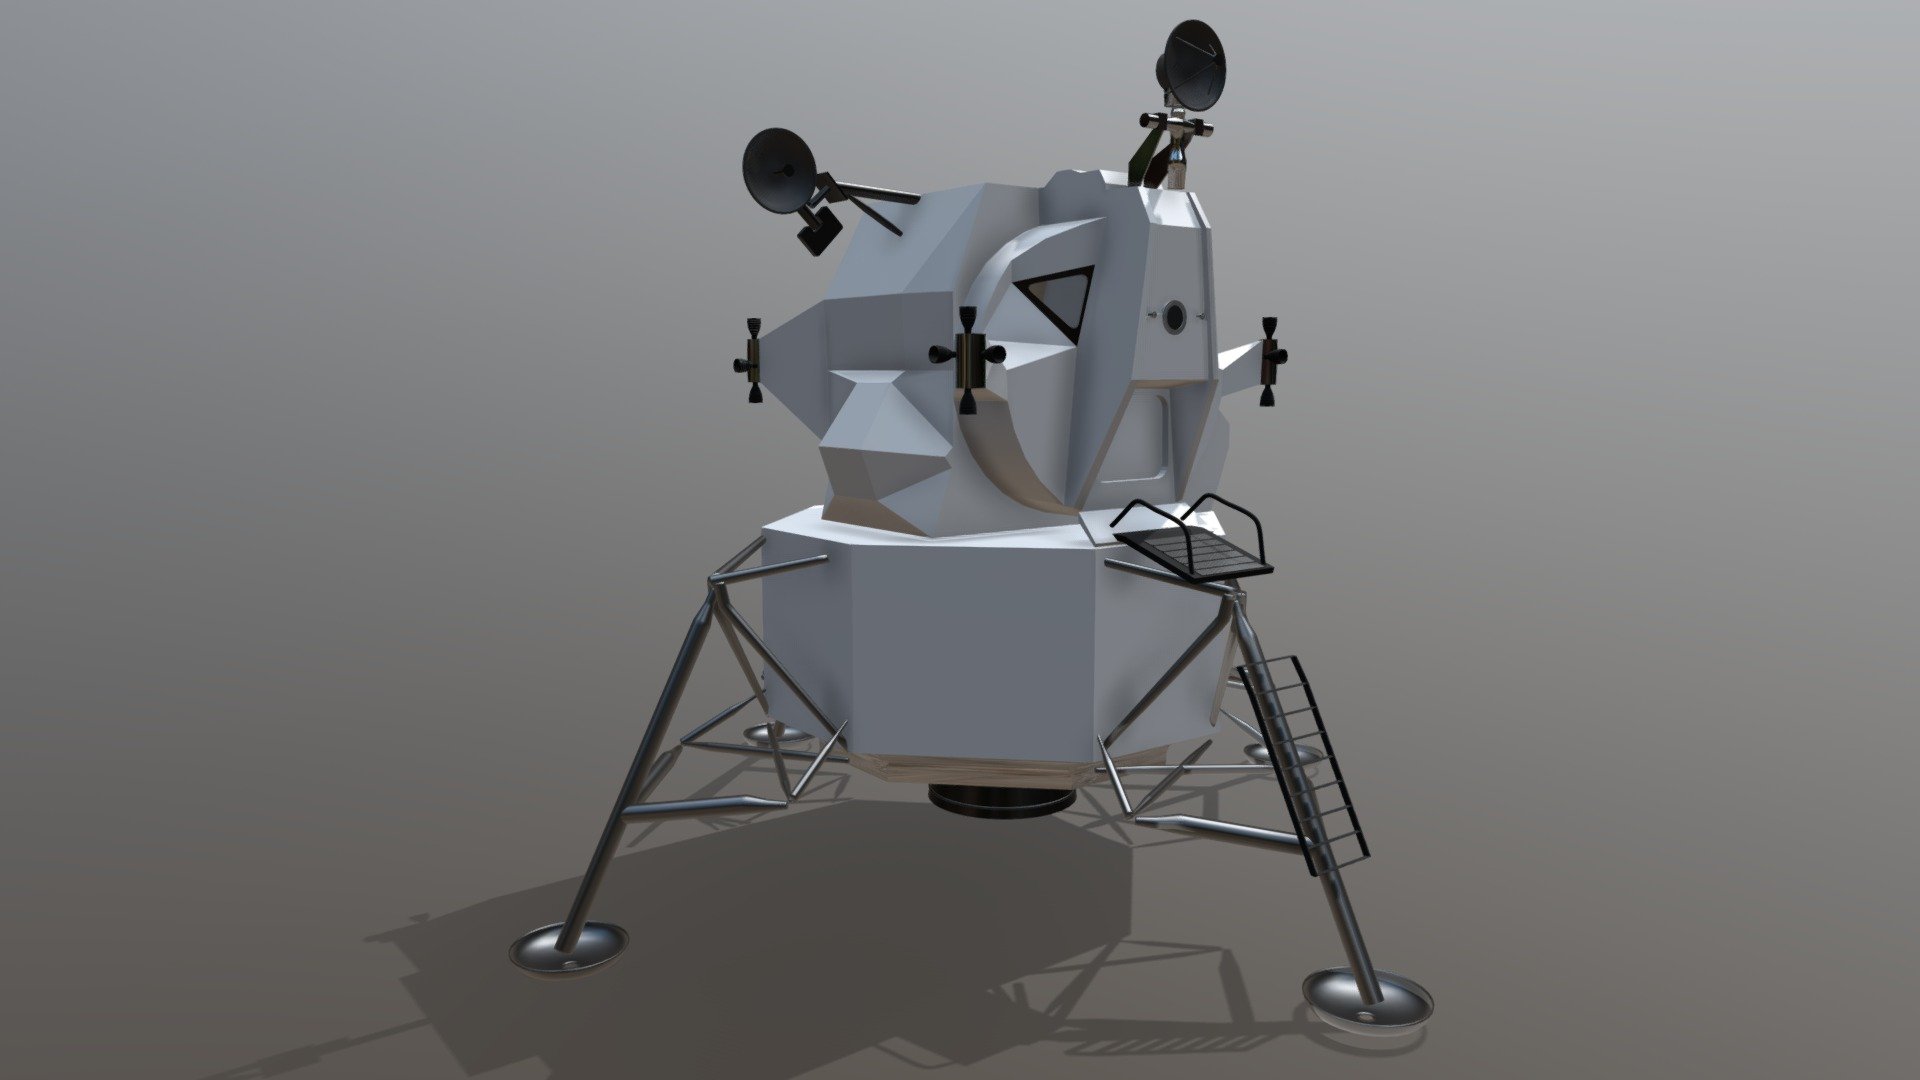 Apollo 13 LEM spacecraft lander. Only basic geometry. Original photos show wrapped in gold foil. Blender redone to Blender 2.79b. cycles engine 3d model